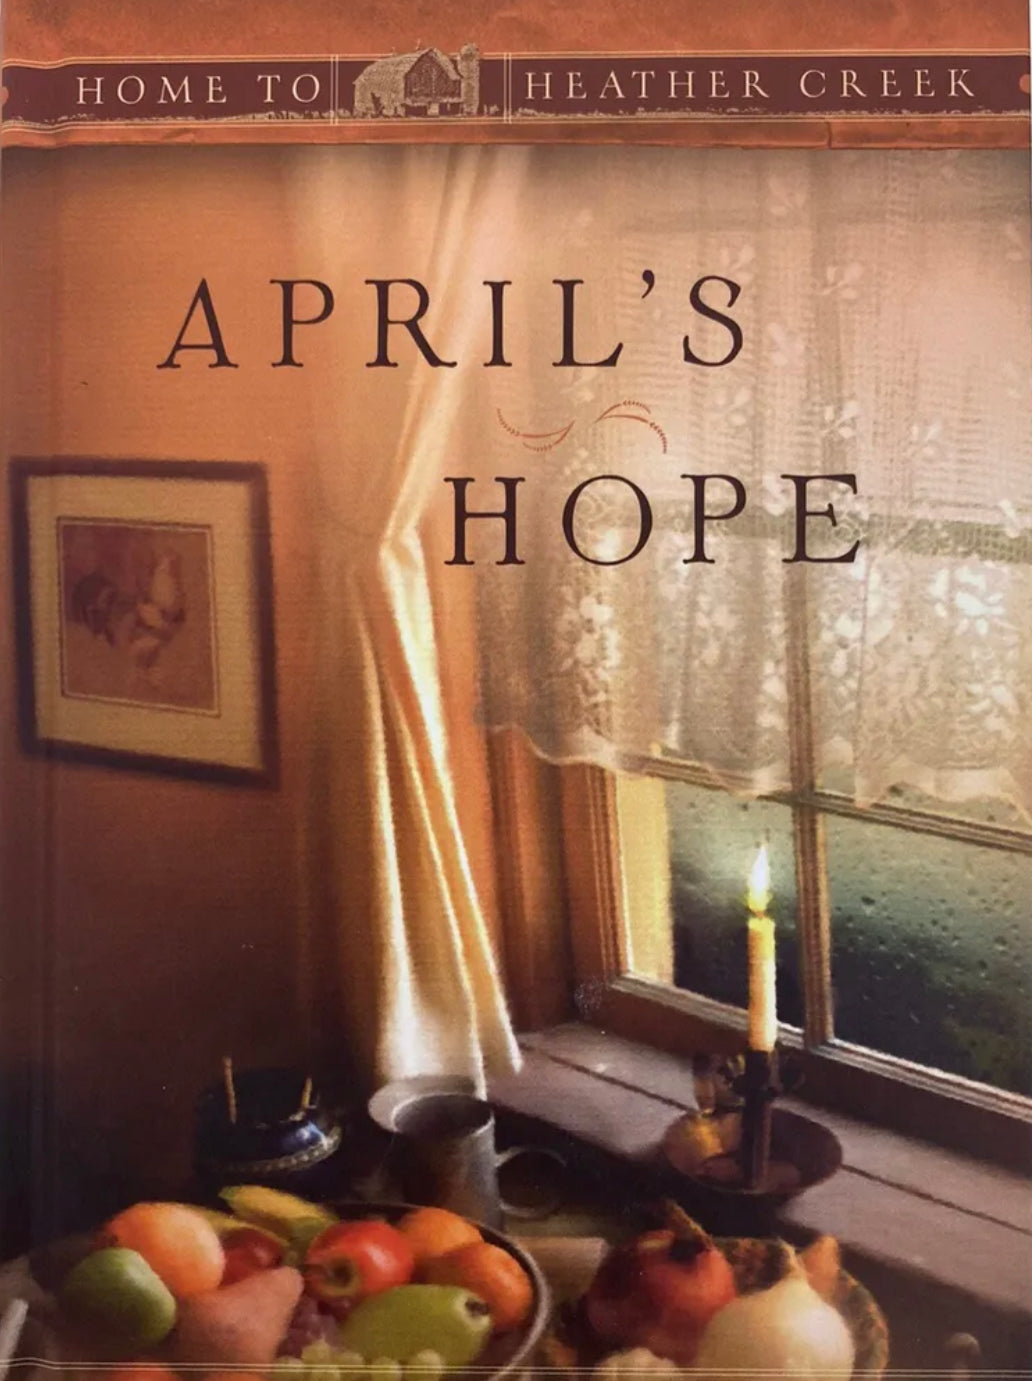 Home to Heather Creek: April’s Hope by Robert Elmer